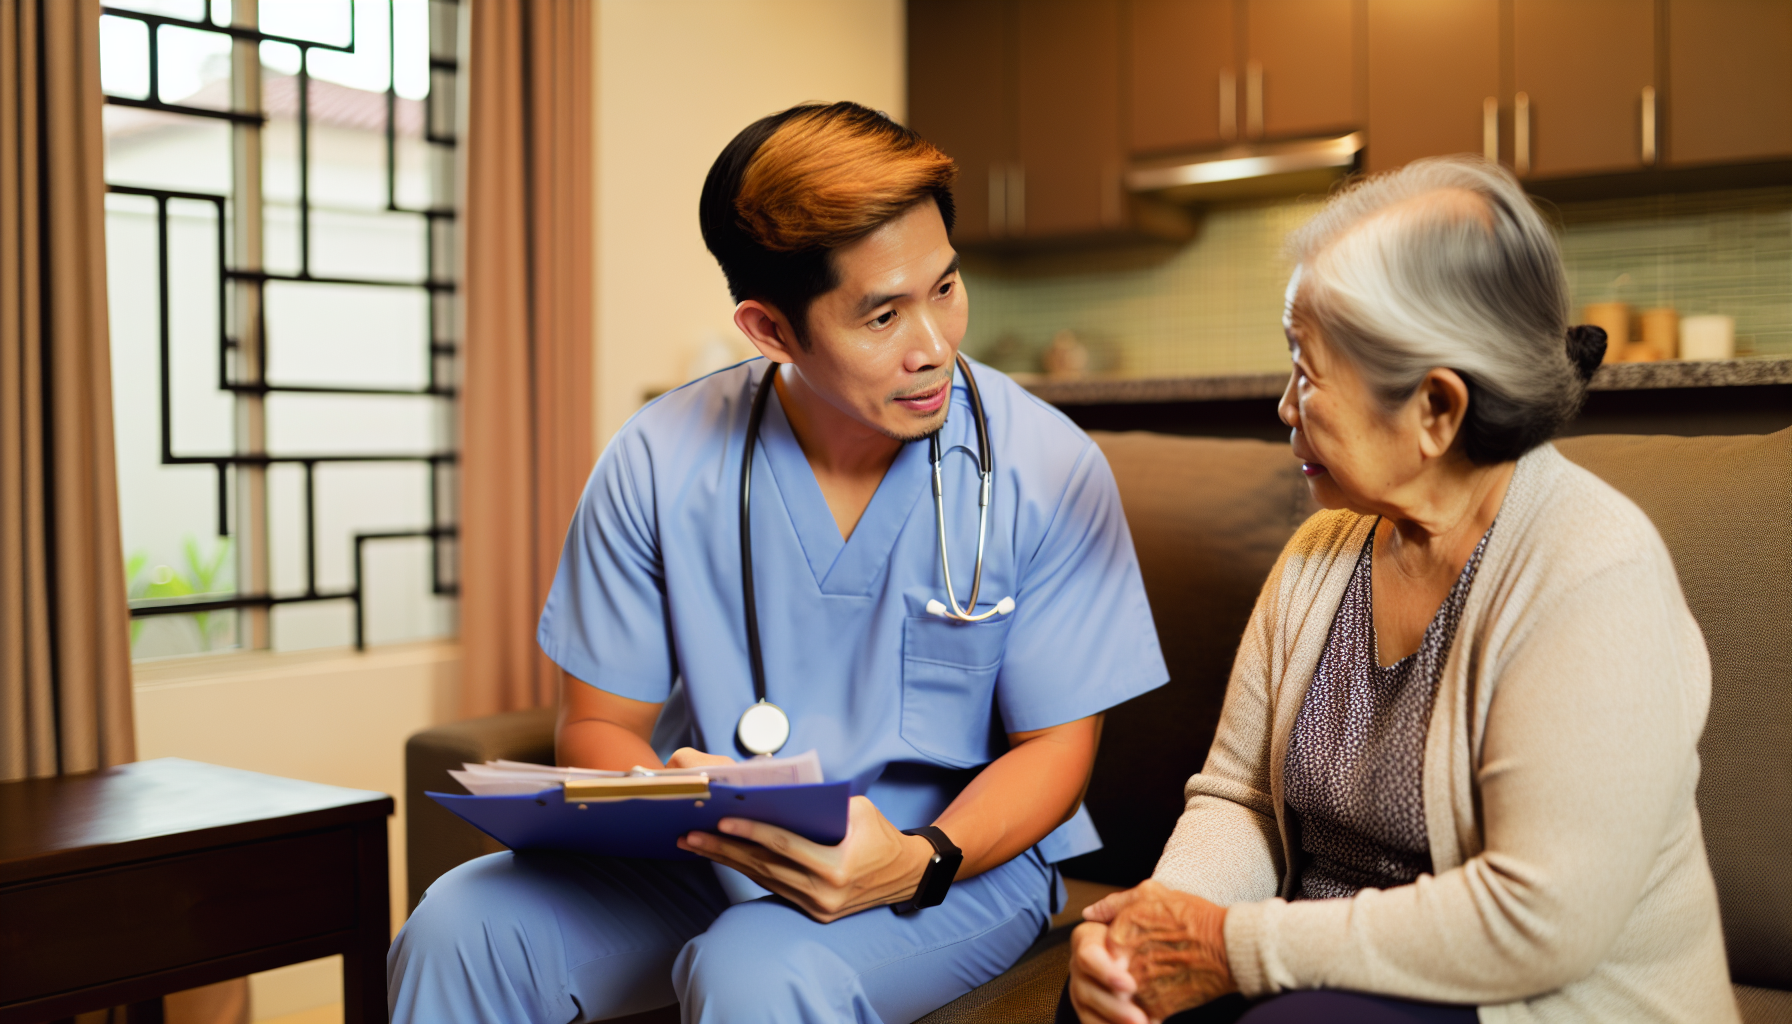 A registered nurse visiting a patient at home